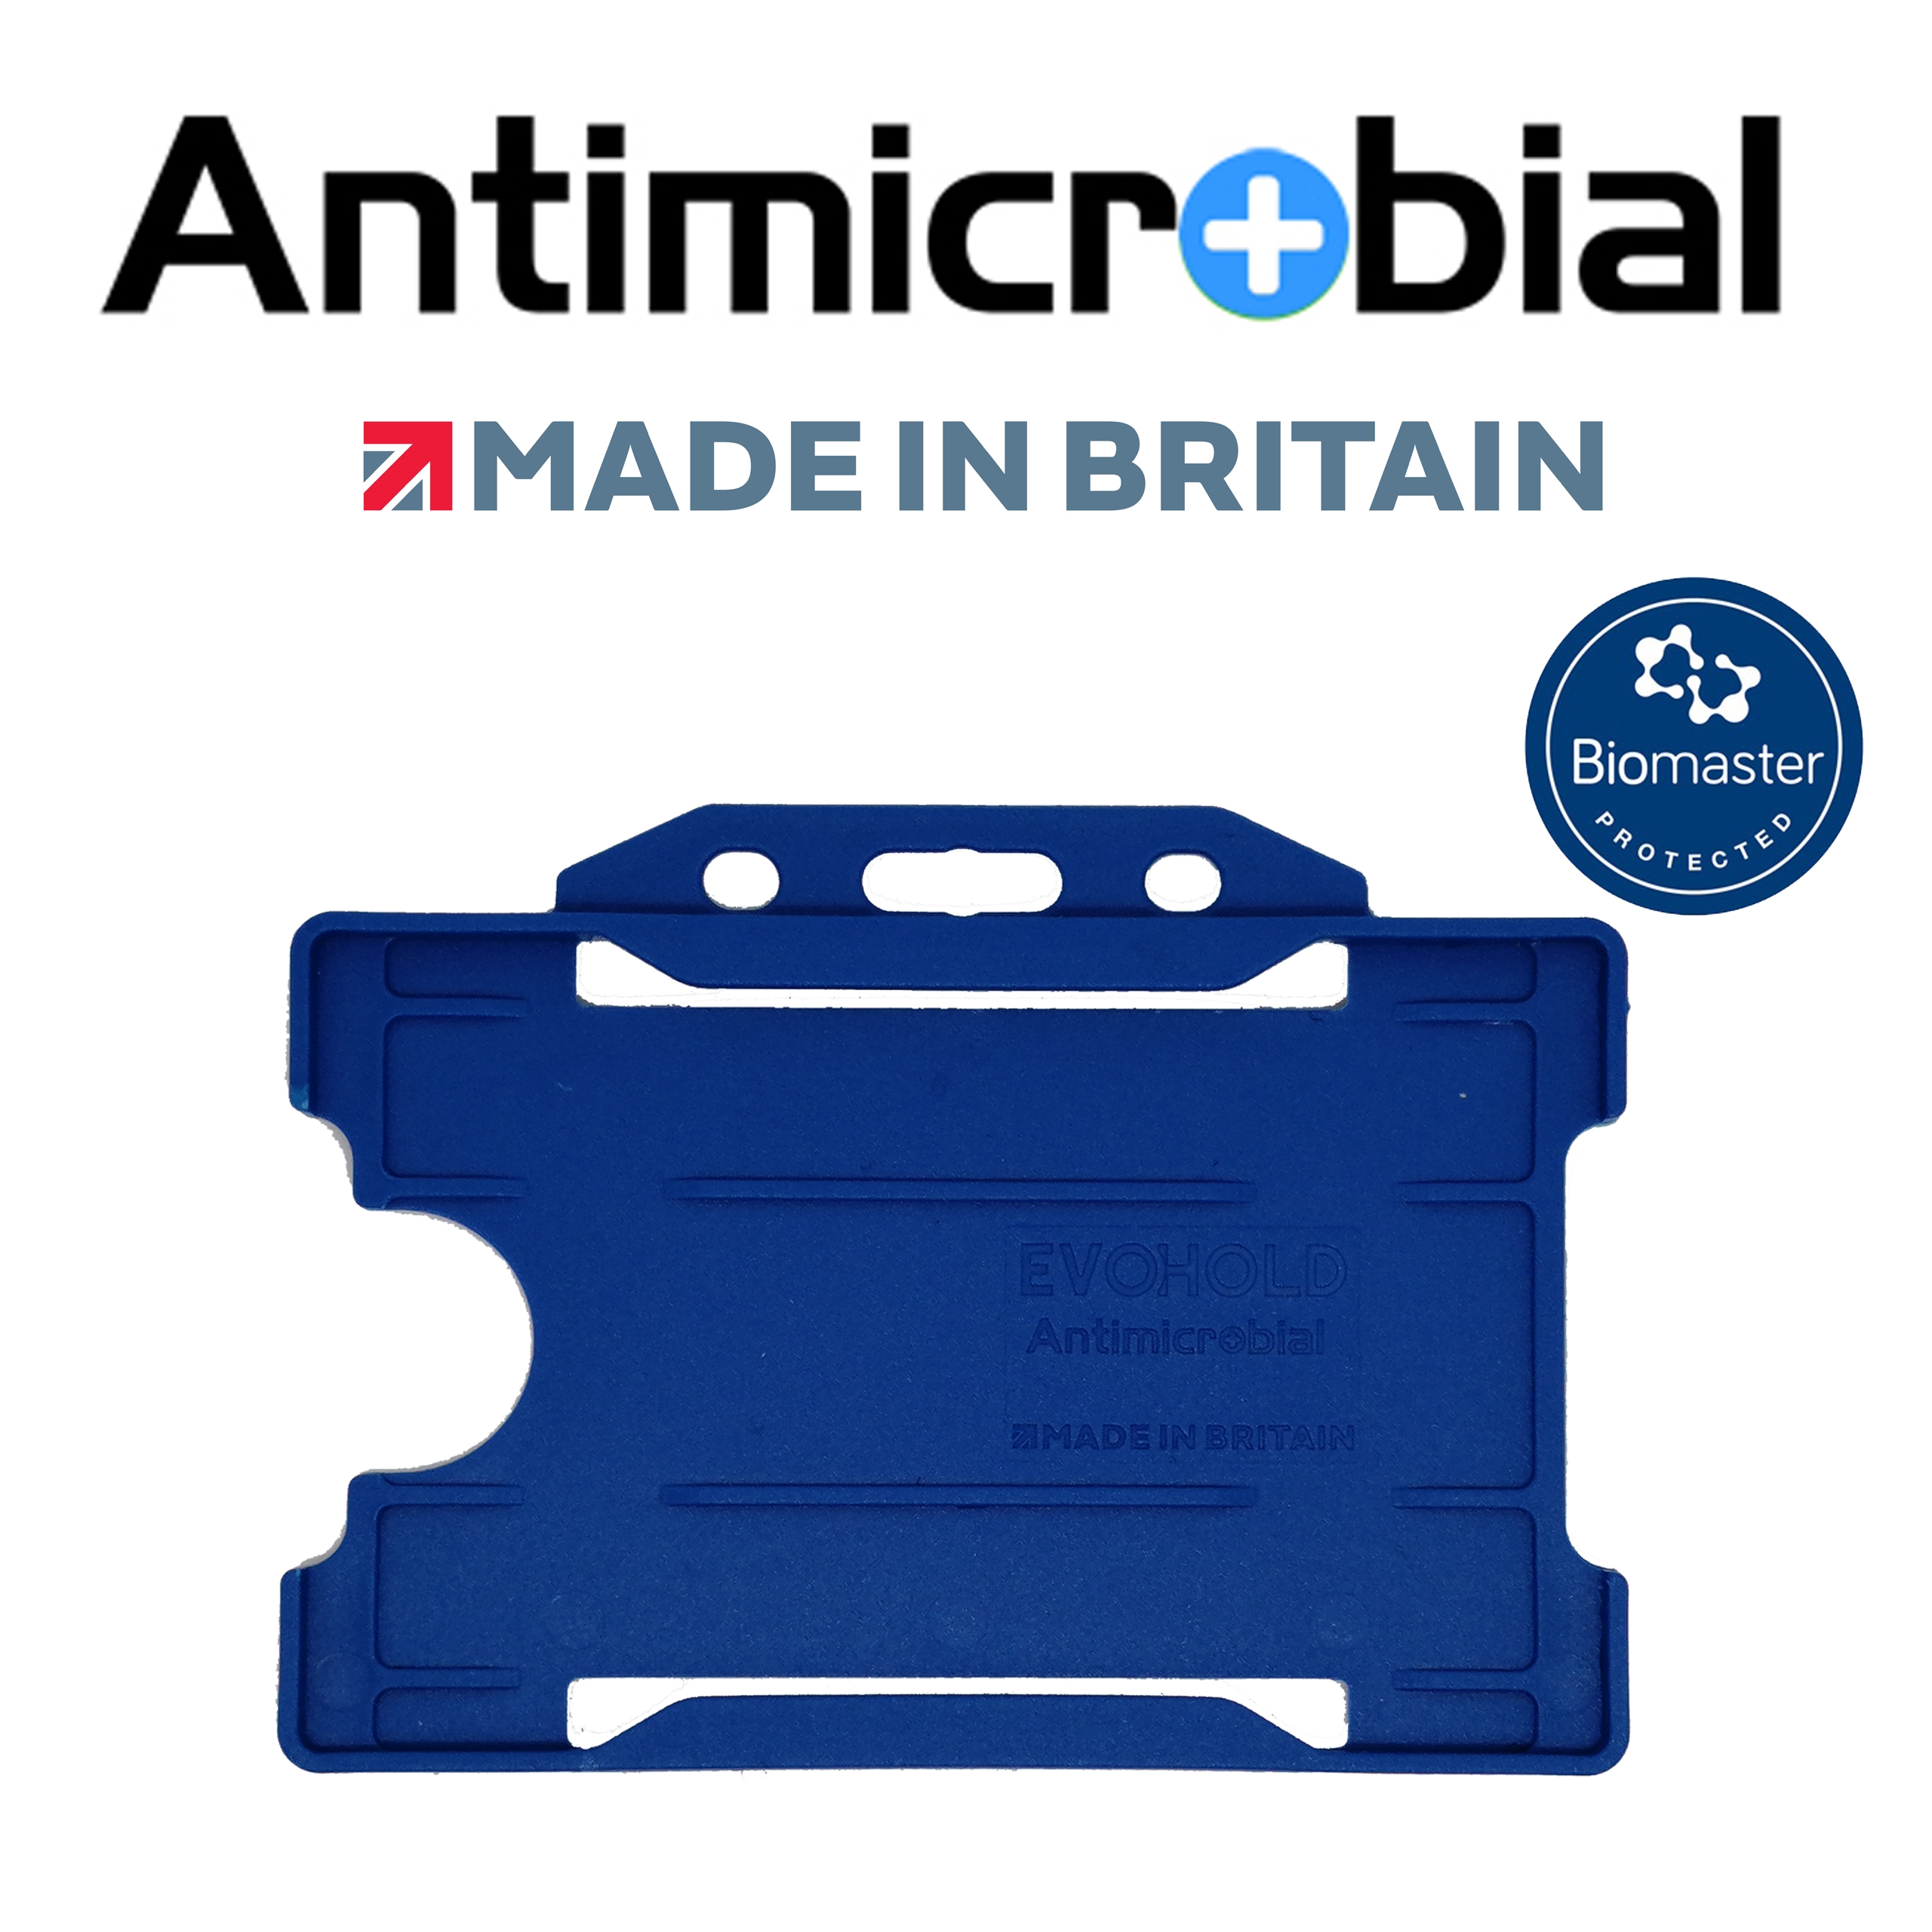 Antimicrobial recyclable single sided rigid badge holder - Landscape, NHS Blue